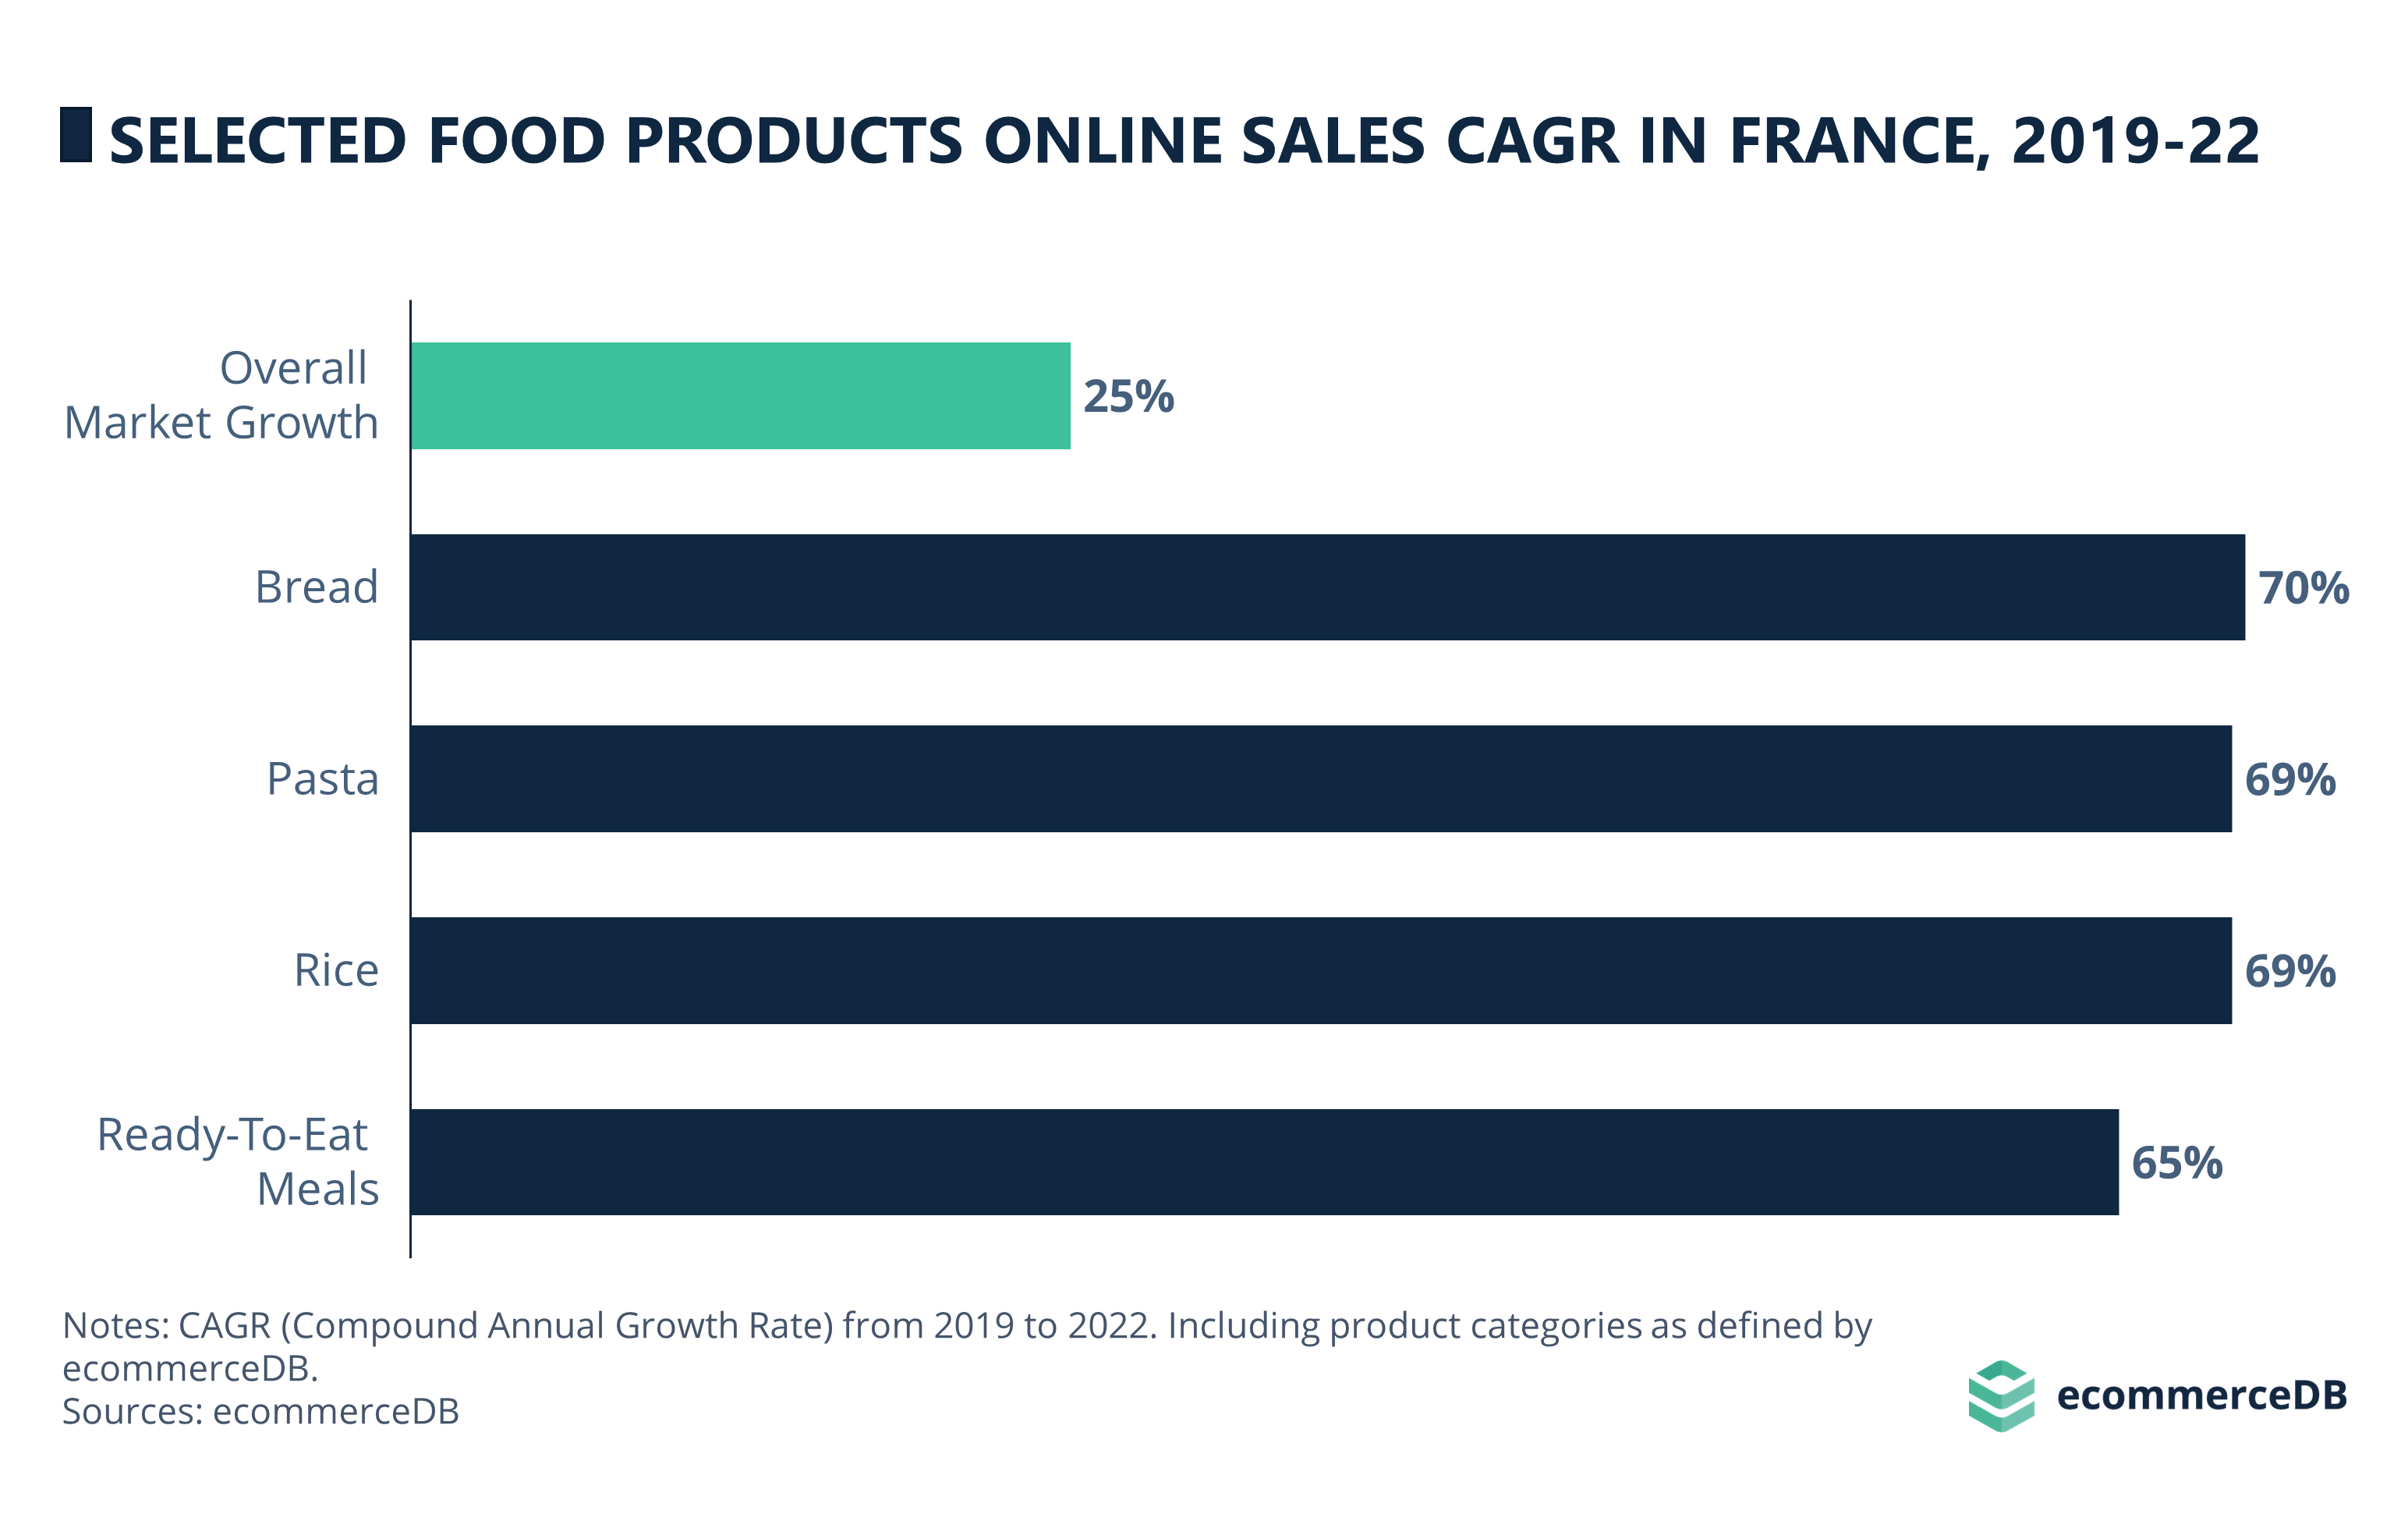 Convenience & Other Food Online Sales CAGR (19-22) in France